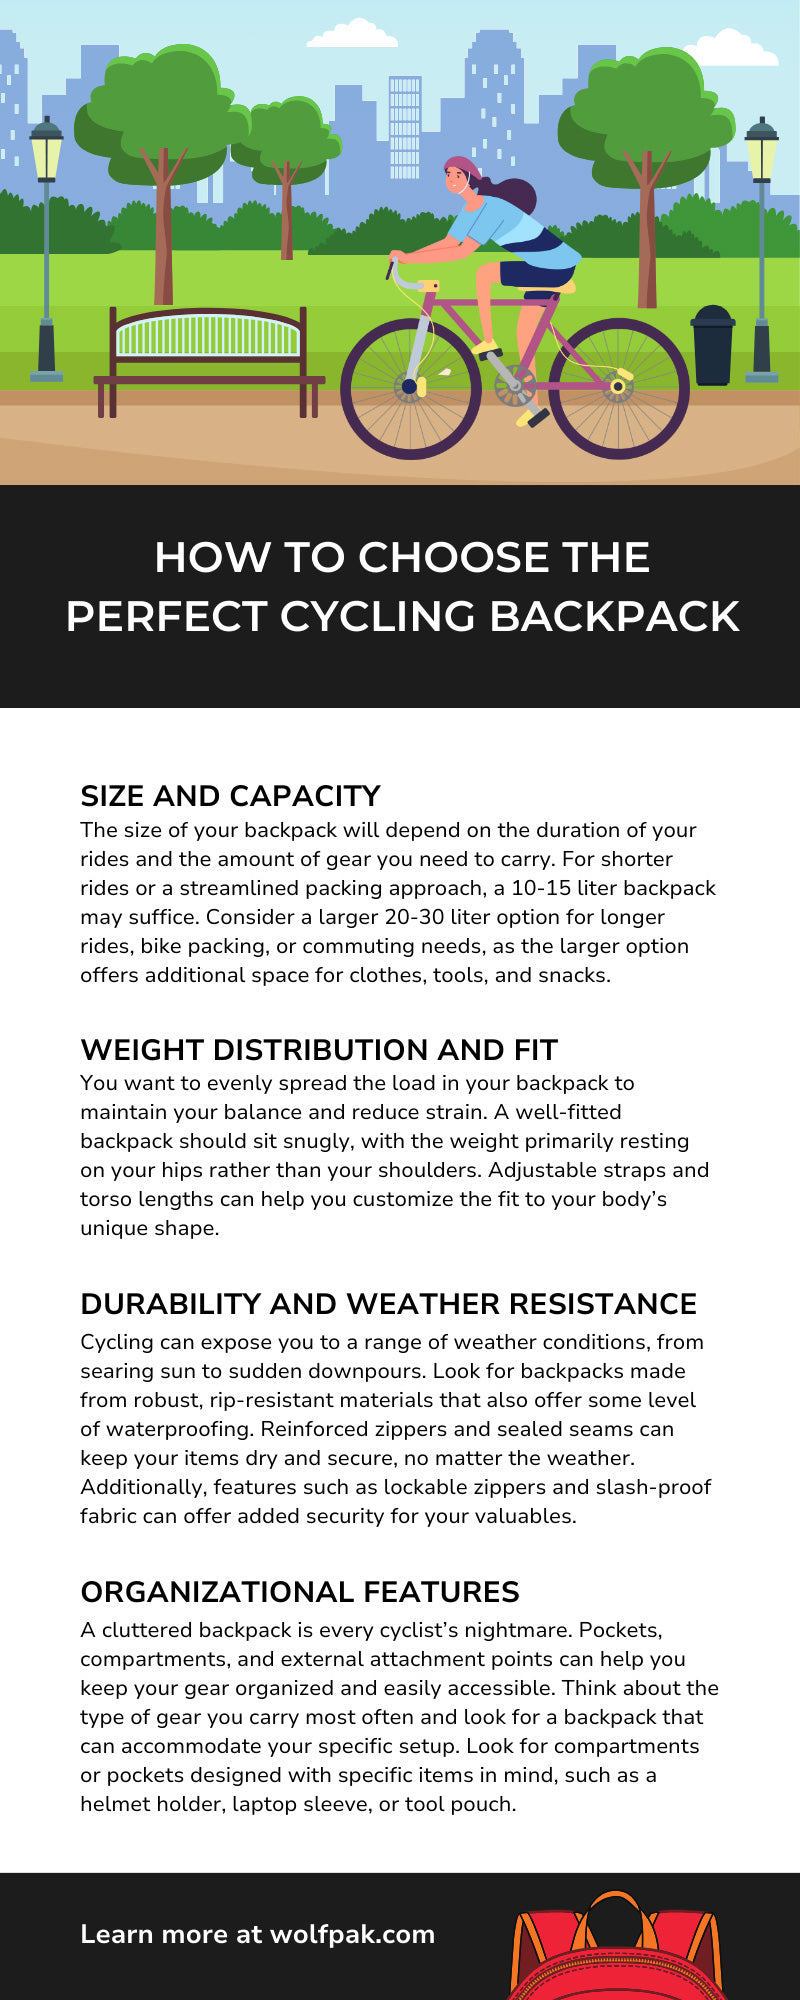 How To Choose the Perfect Cycling Backpack